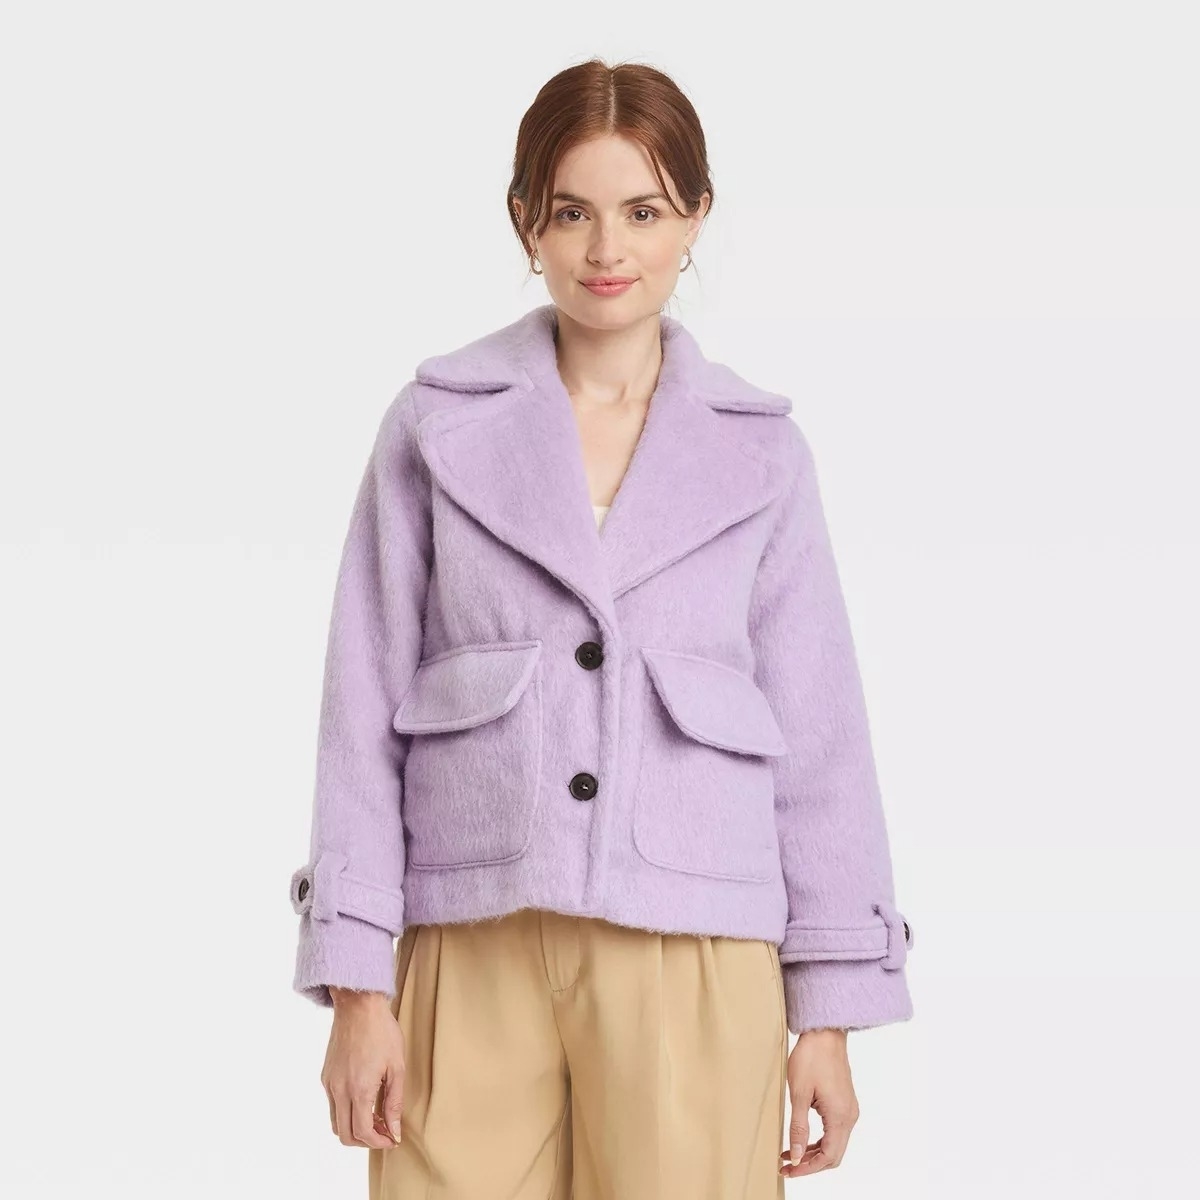 Model in a purple jacket with large buttons and flap pockets, paired with light trousers